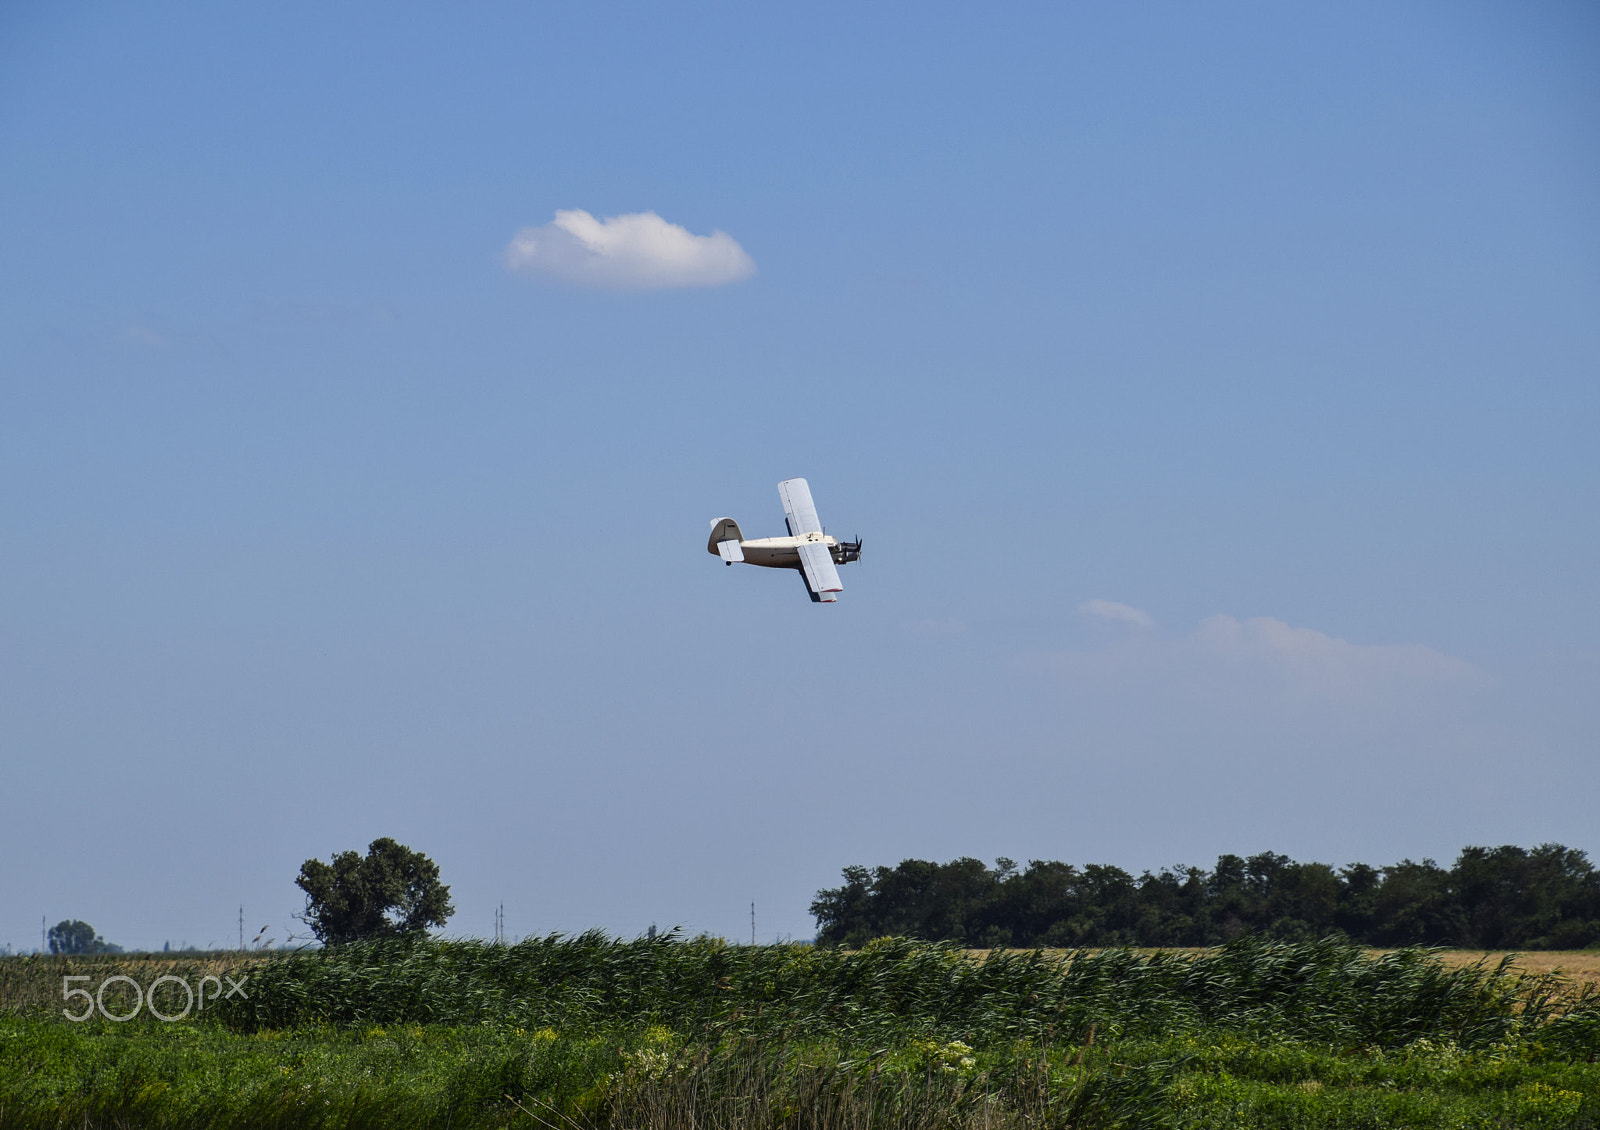 Nikon D3300 + Tamron 16-300mm F3.5-6.3 Di II VC PZD Macro sample photo. The spraying of fertilizers and pesticides on the field with the aircraft. photography